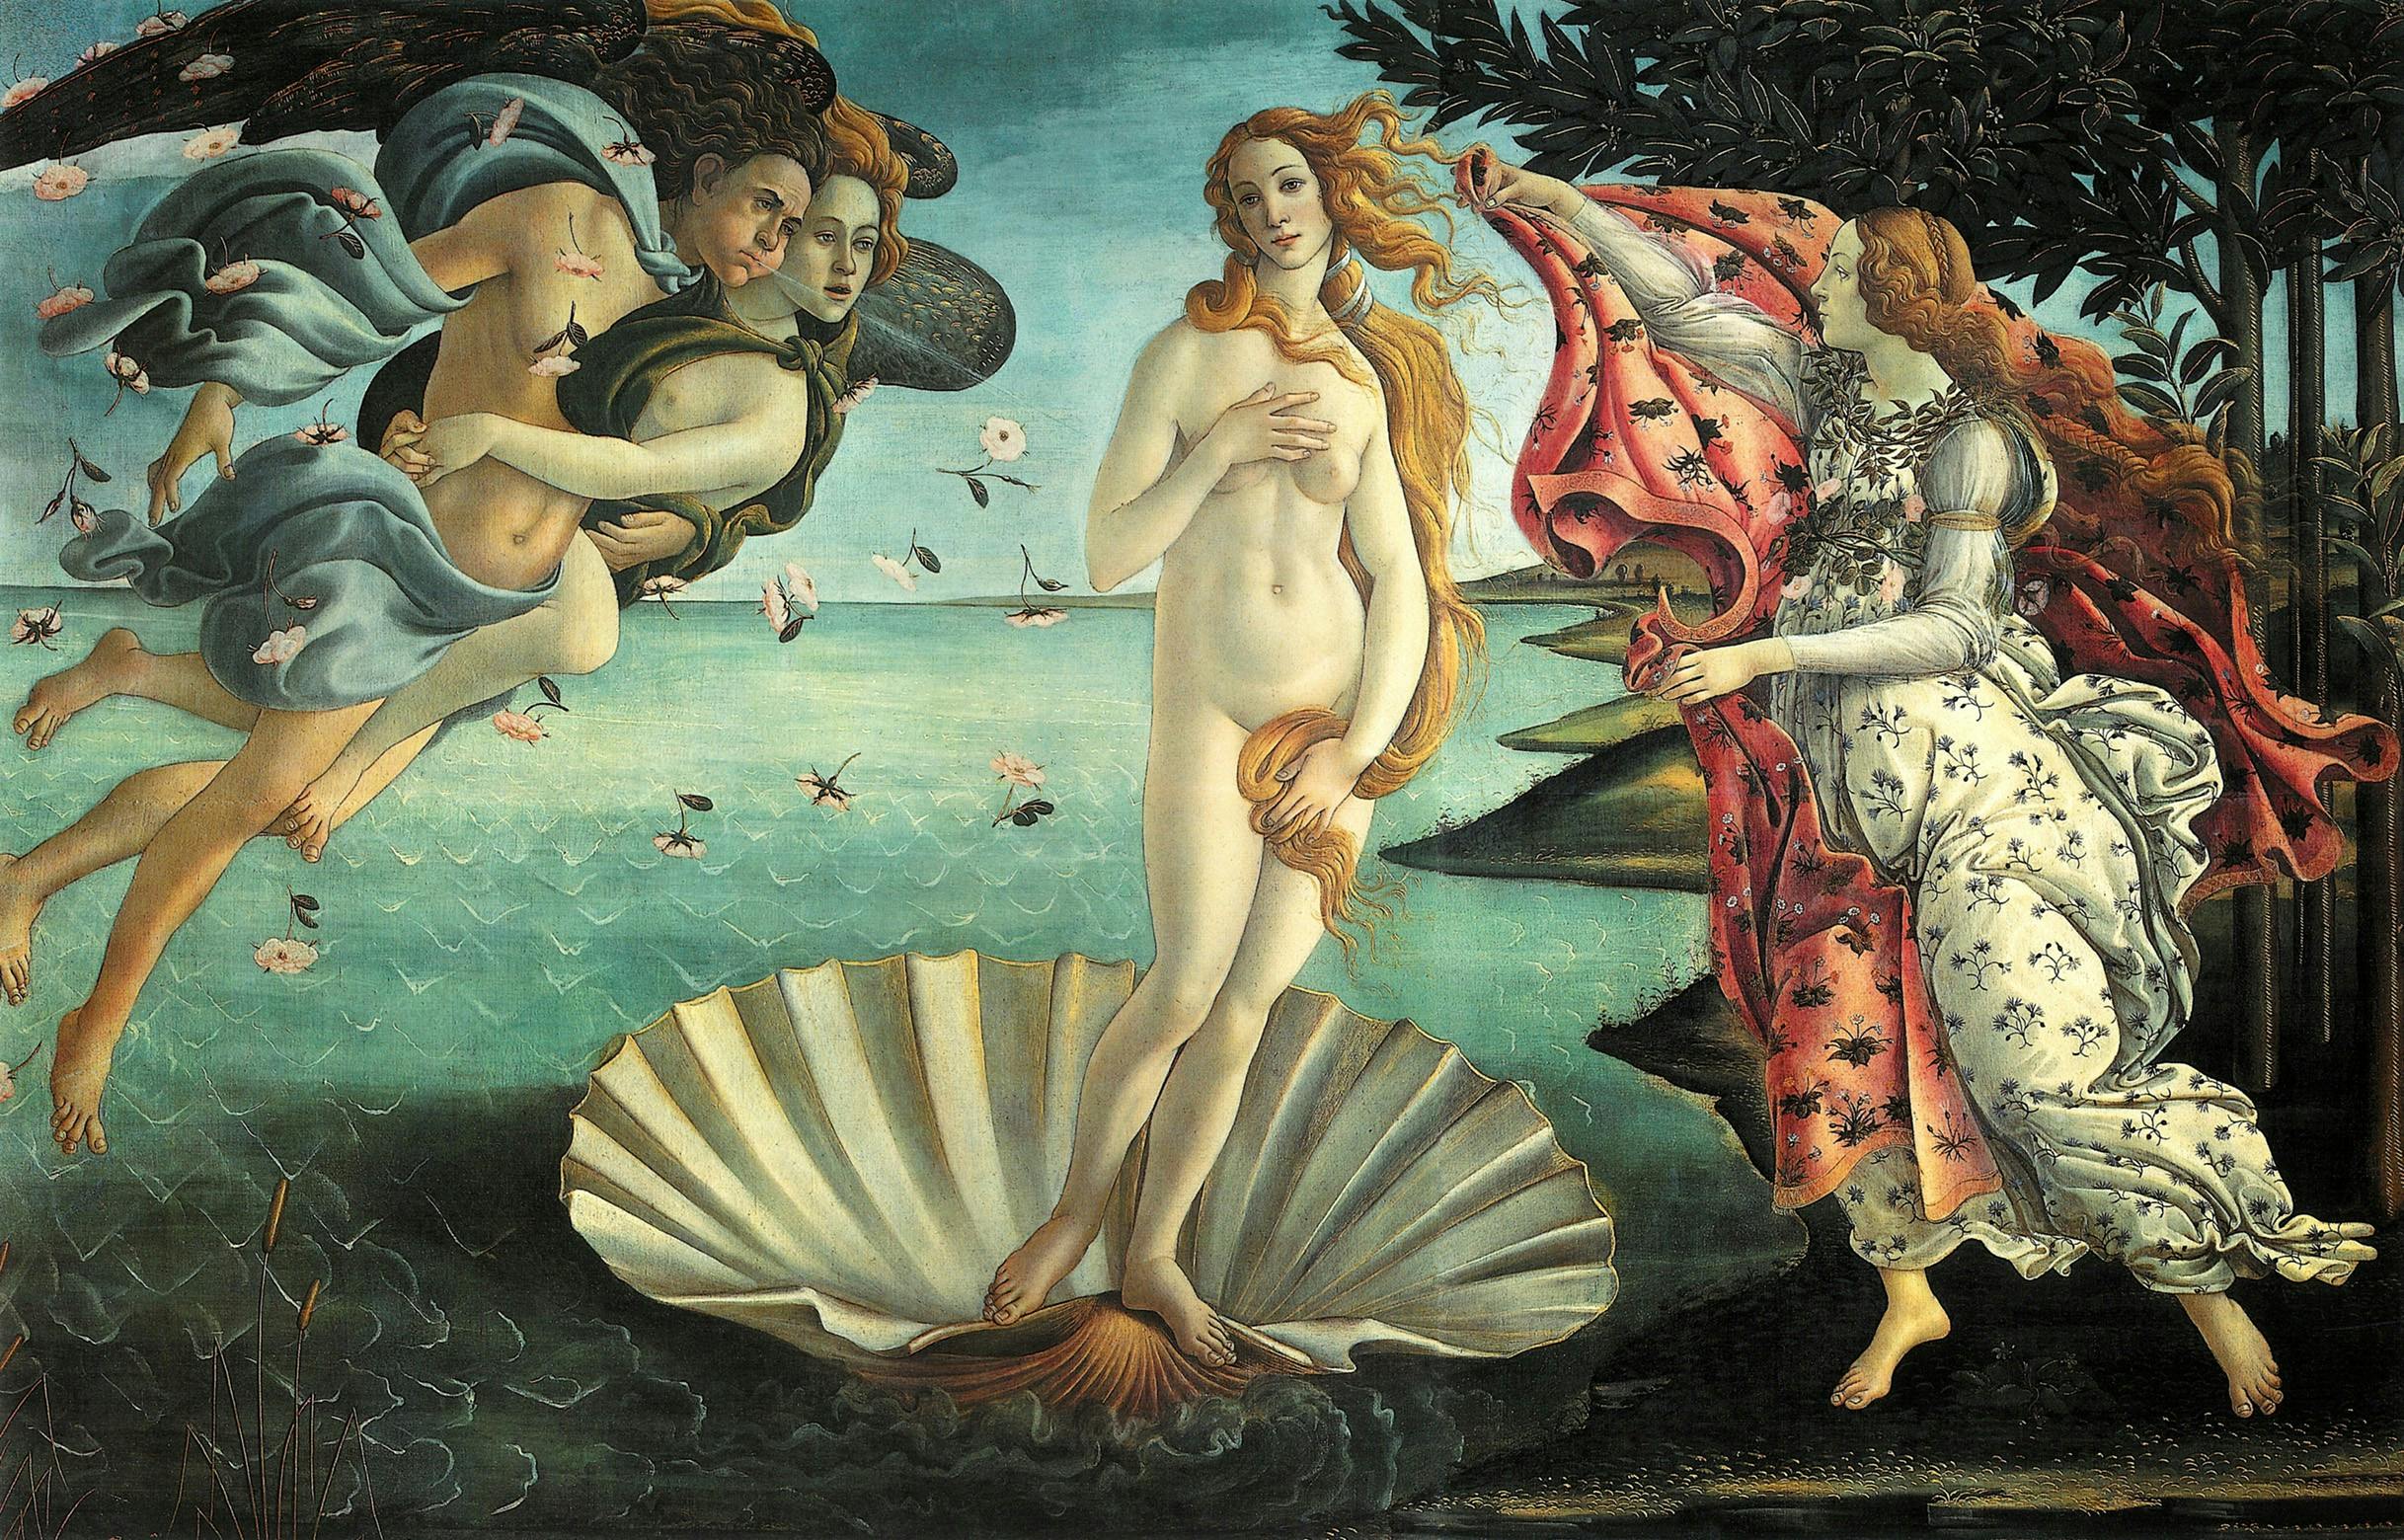 Florence Day Tour with Uffizi and Accademia Gallery: Skip the Line Tickets and Guided Visit